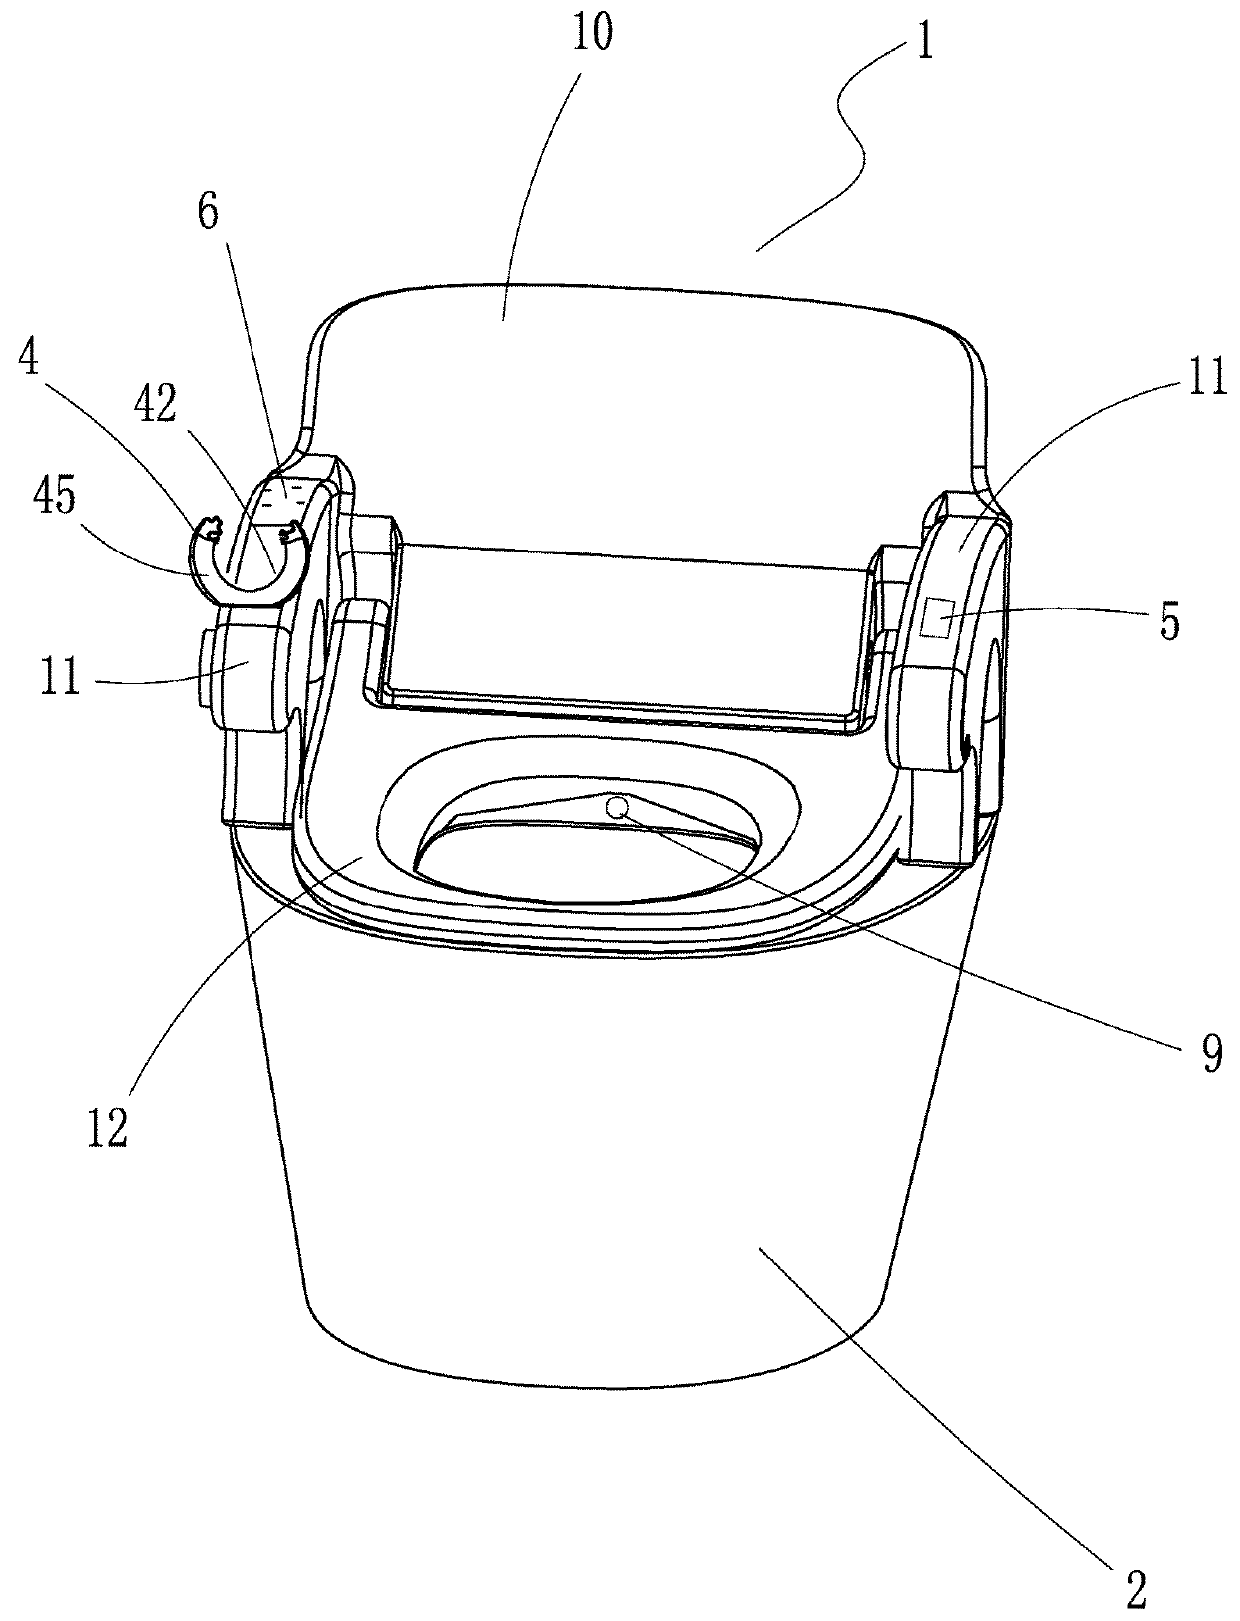 Smart toilet with a function of human blood pressure detection